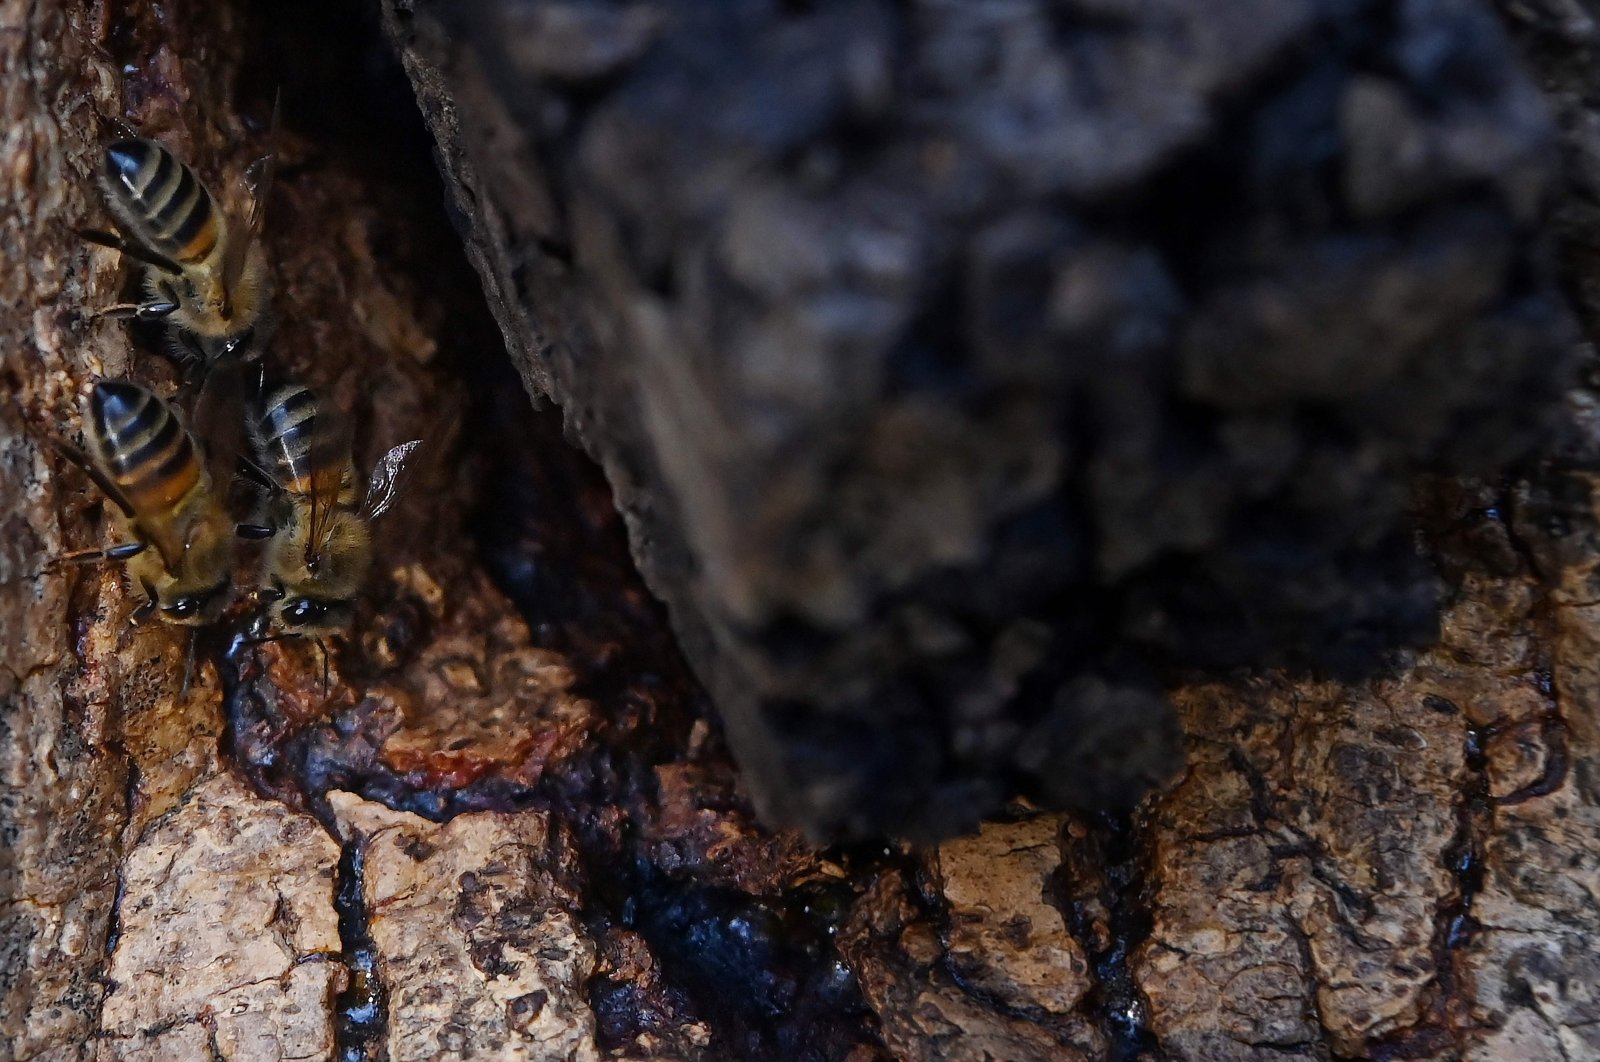 Honeybees are seen in a colony located in a Ash tree in High Park on the Blenheim Estate in Oxfordshire, U.K., Nov. 20, 2021. (AFP Photo)